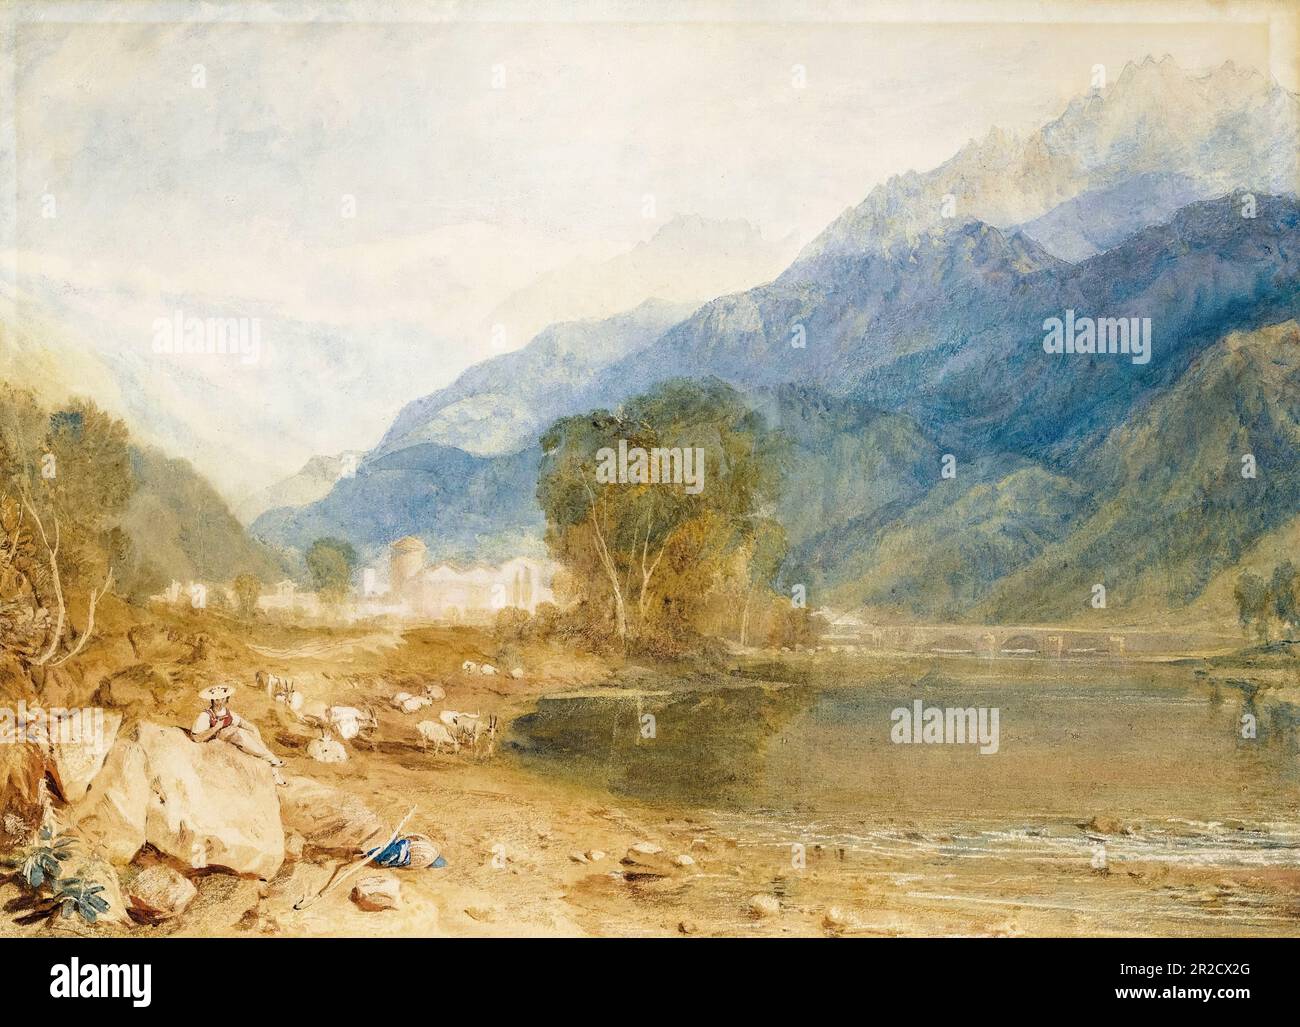 JMW Turner, A View From The Castle Of St Michael, Bonneville, Savoy, From The Banks Of The Arve River, landscape painting before 1851 Stock Photo